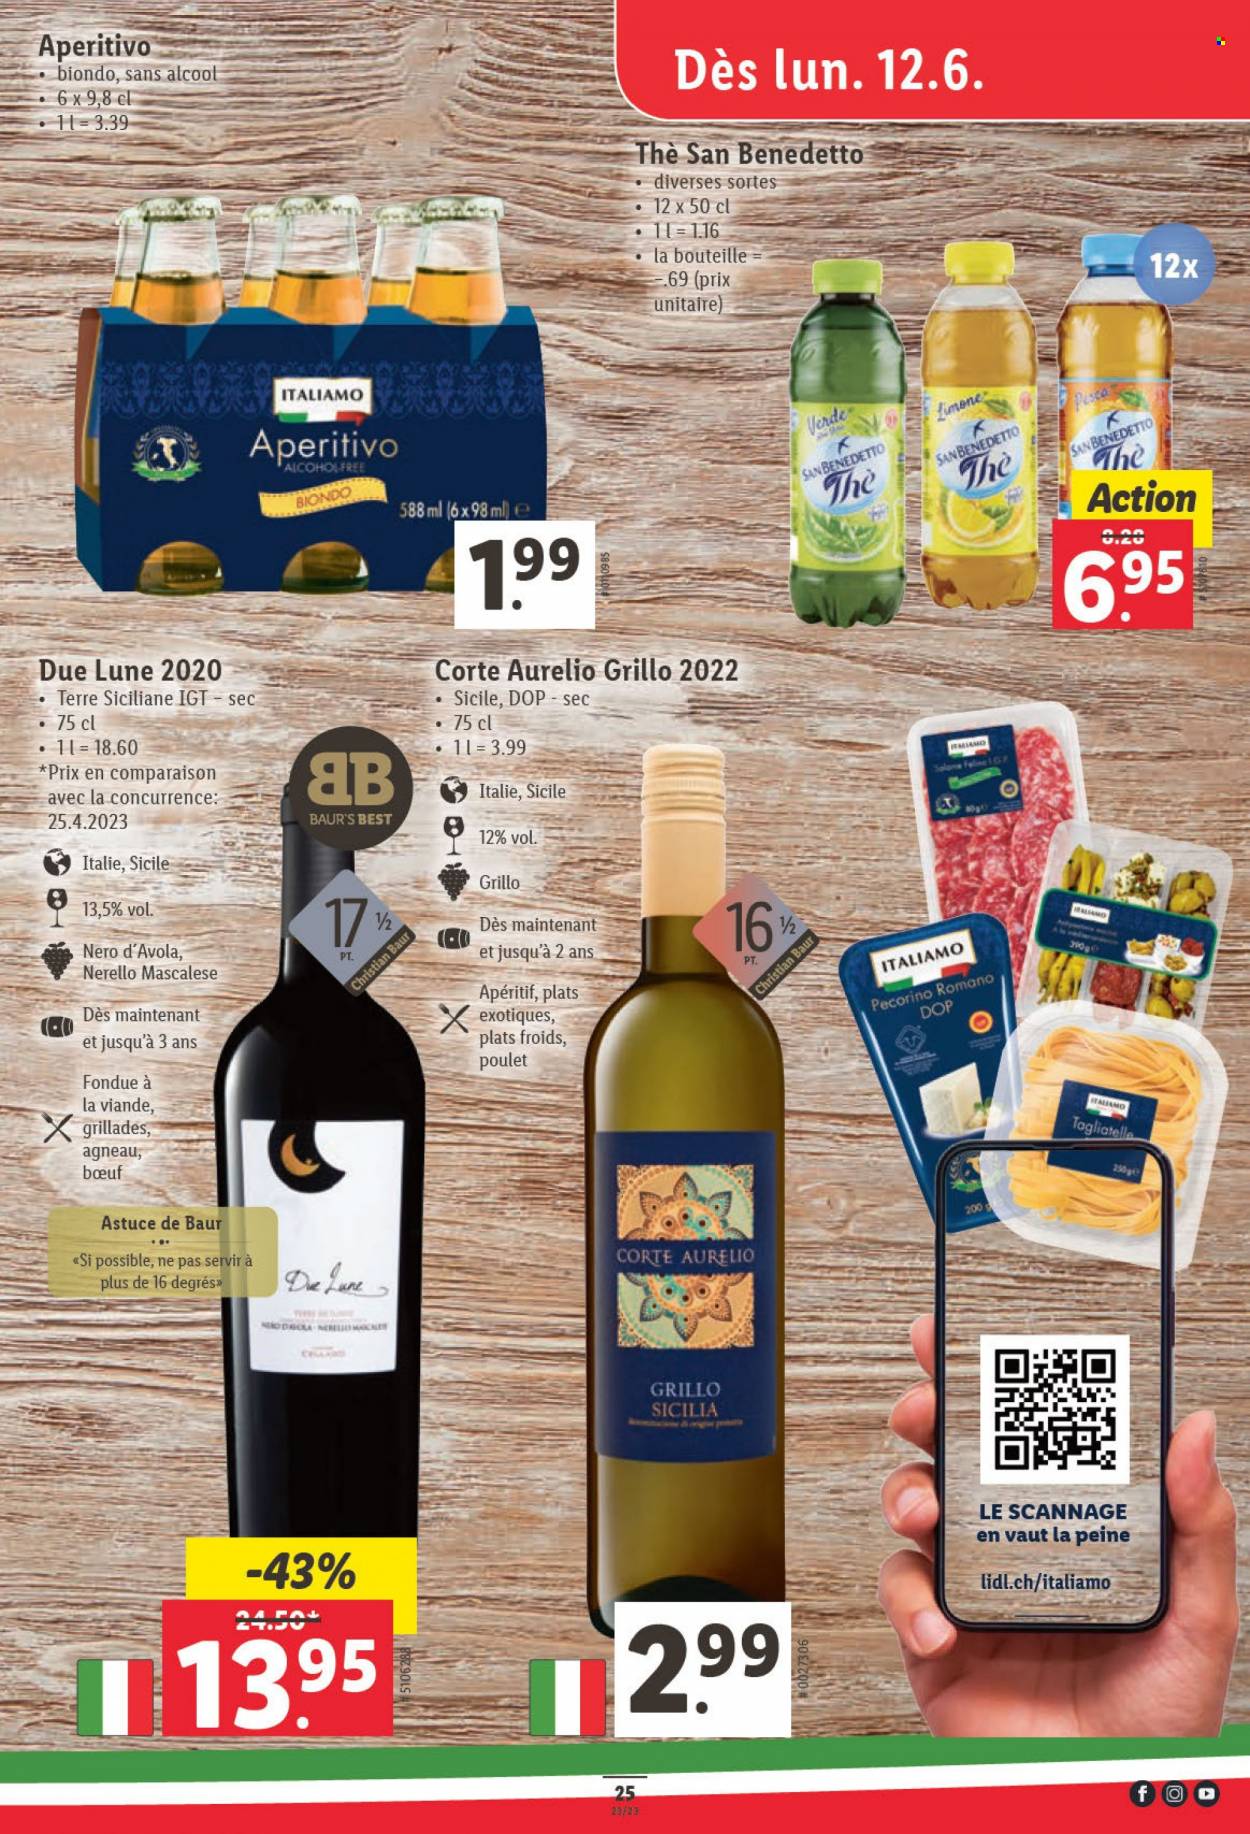 Catalogue Lidl - 8.6.2023 - 14.6.2023. Page 25.